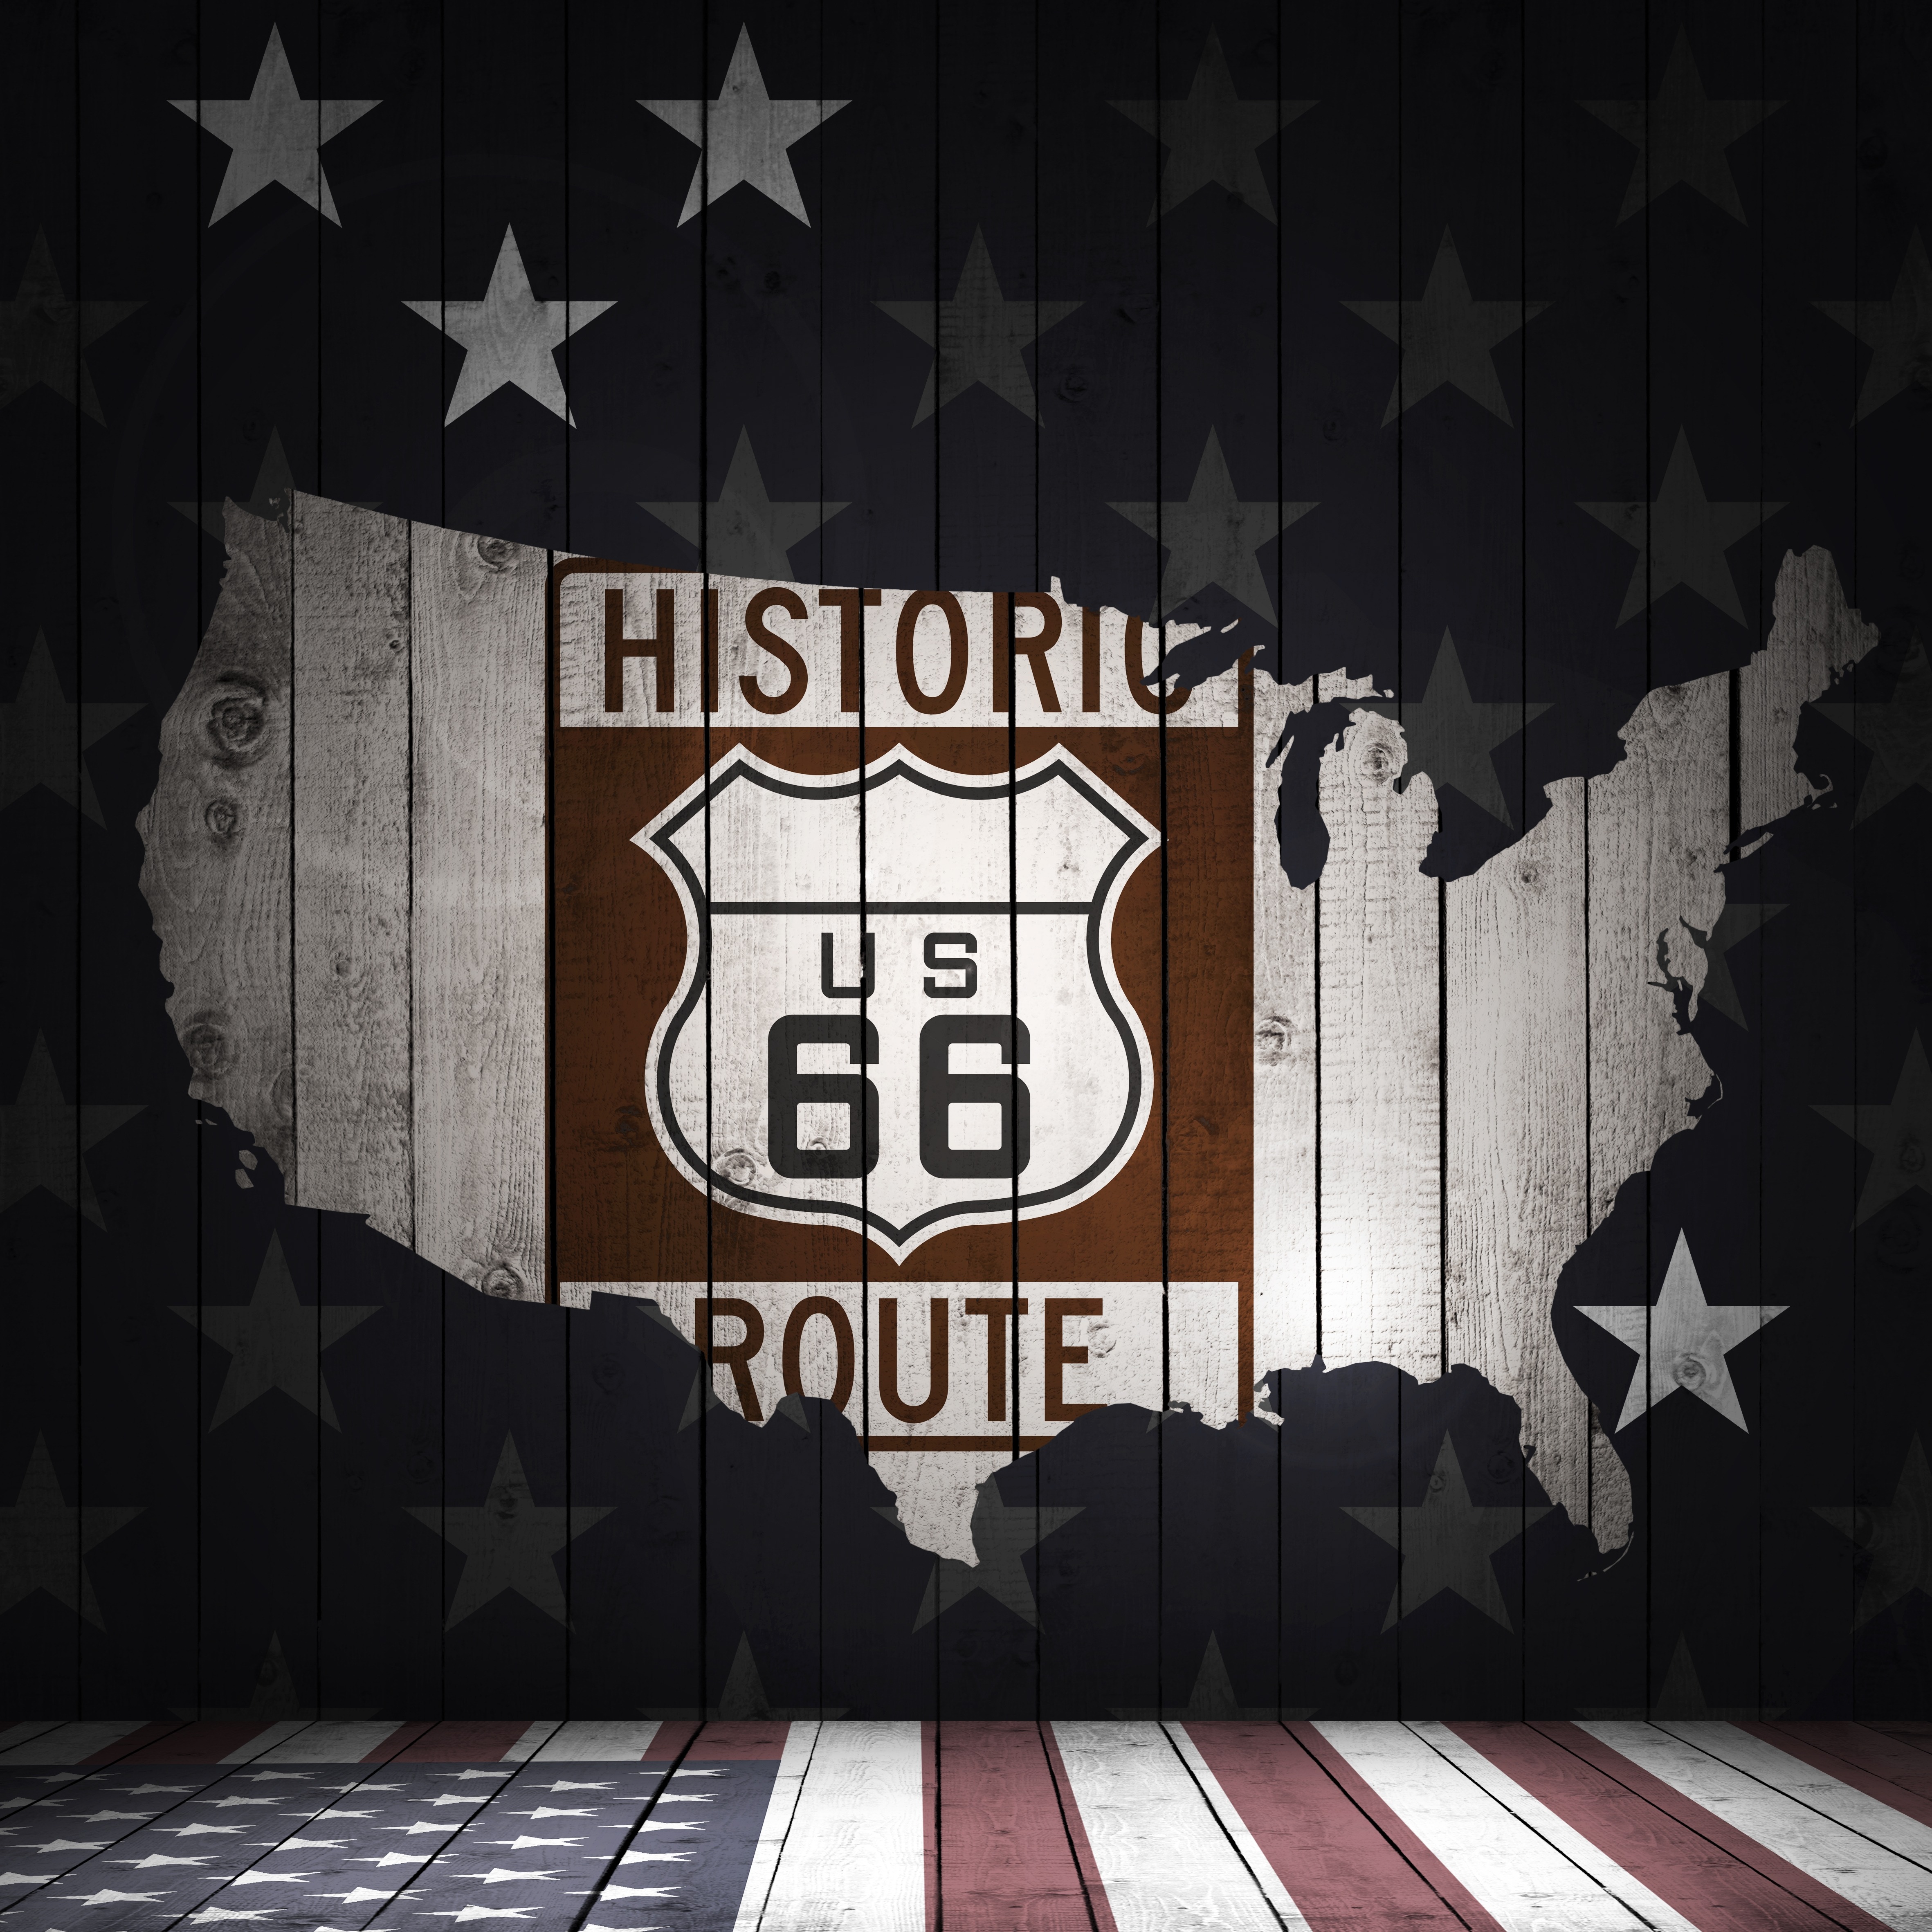 Route66 Specials - getting ready for 100th years anniversary of MOTHER ROAD 253